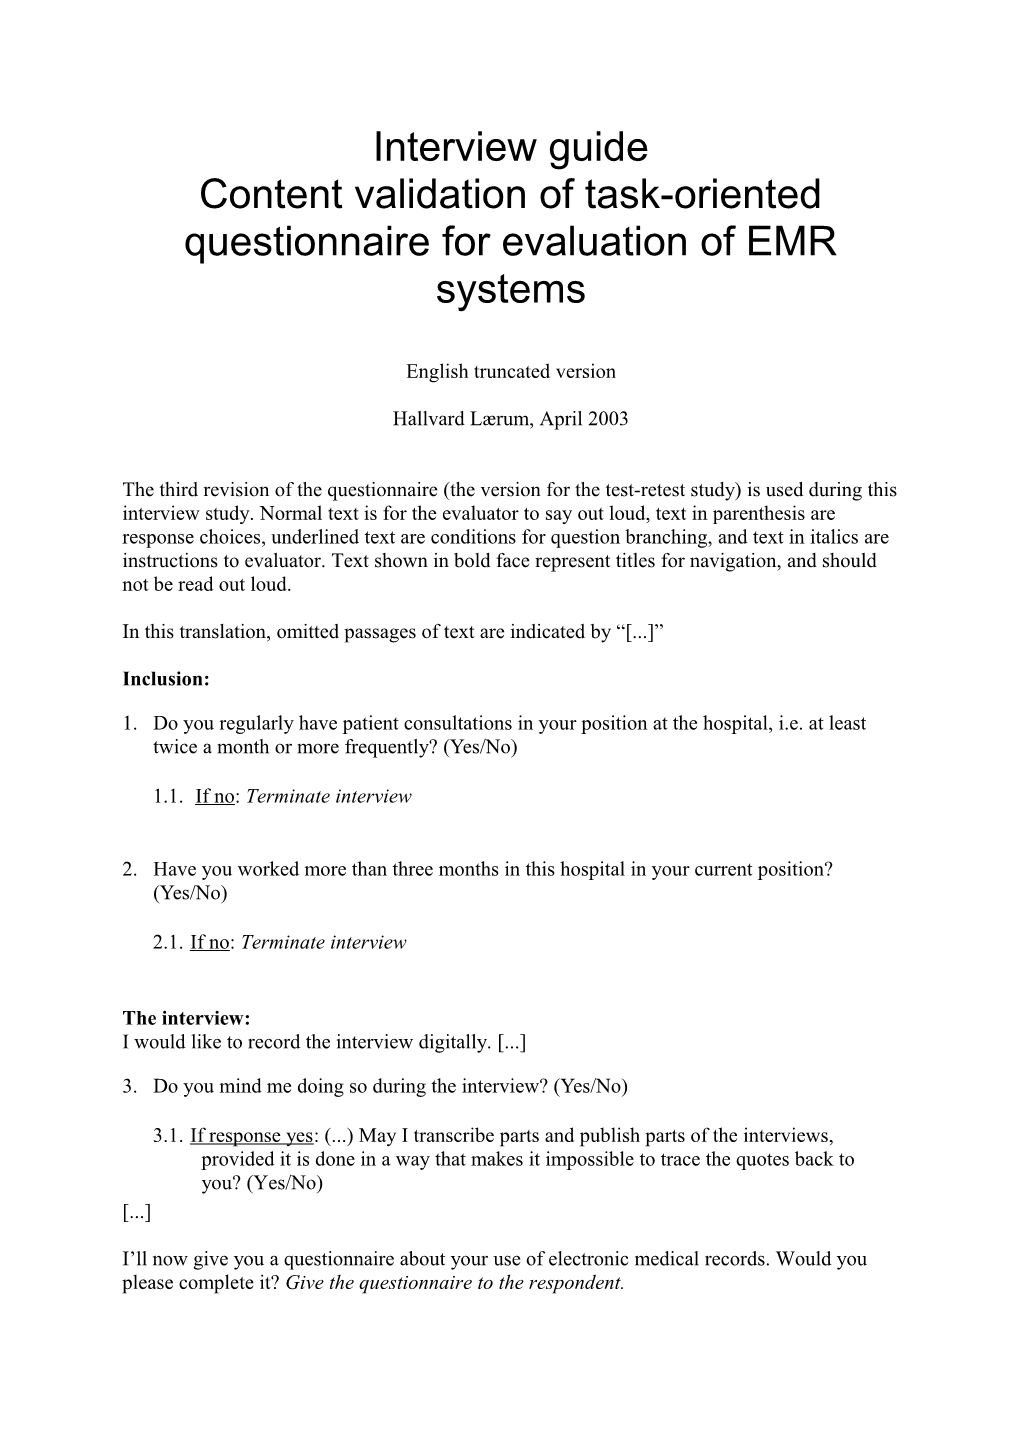 Content Validation of Task-Oriented Questionnaire for Evaluation of EMR Systems